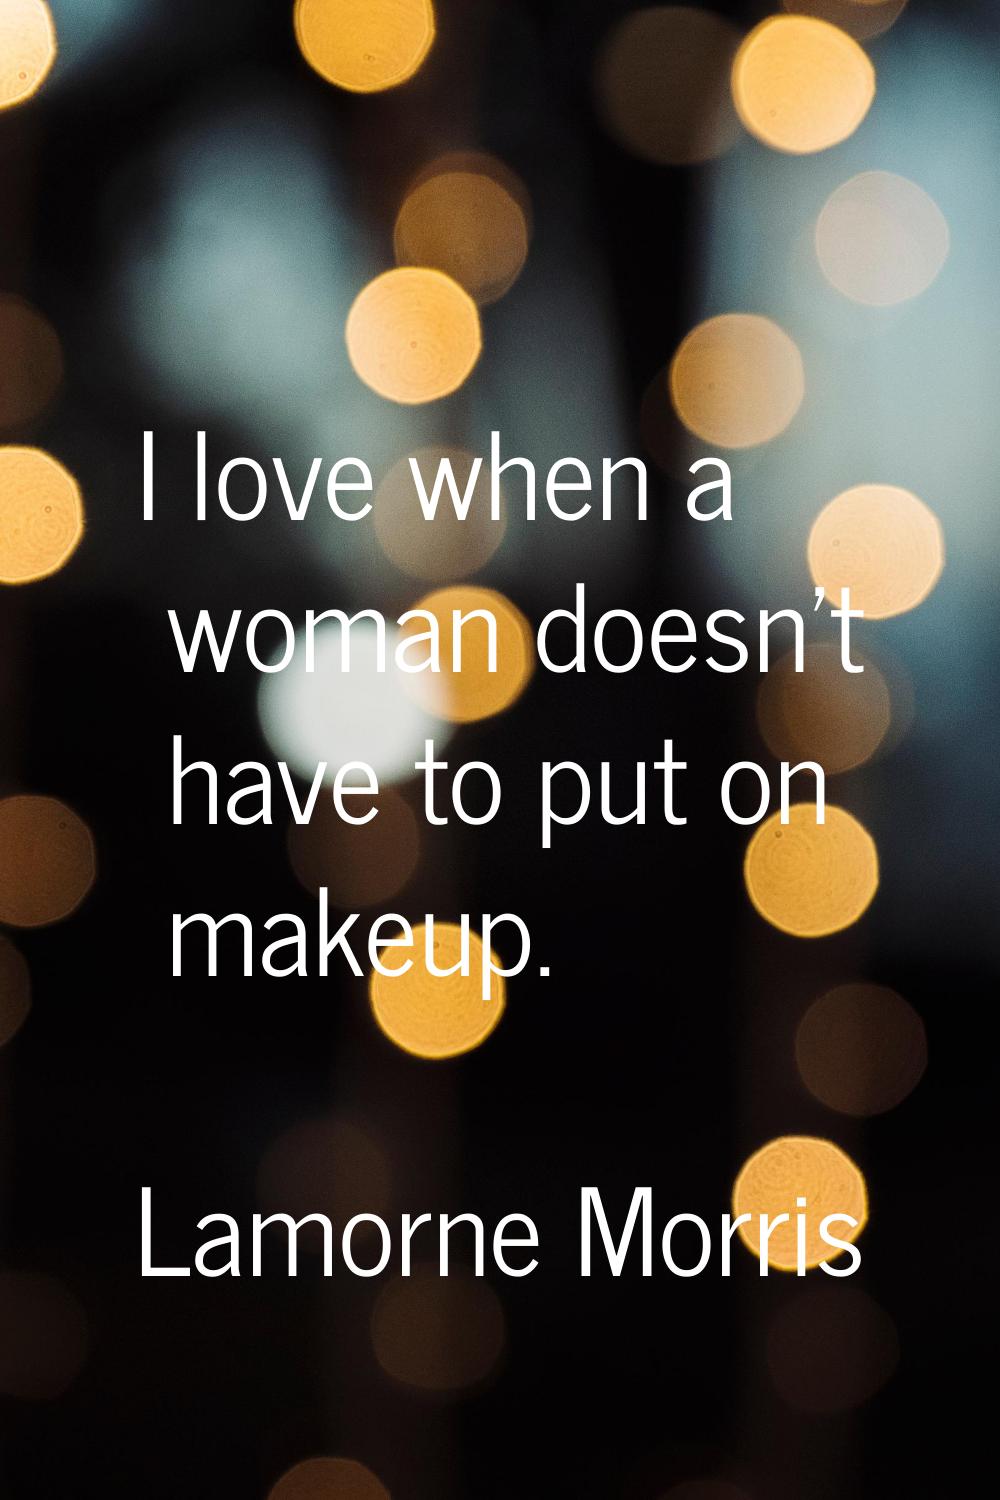 I love when a woman doesn't have to put on makeup.